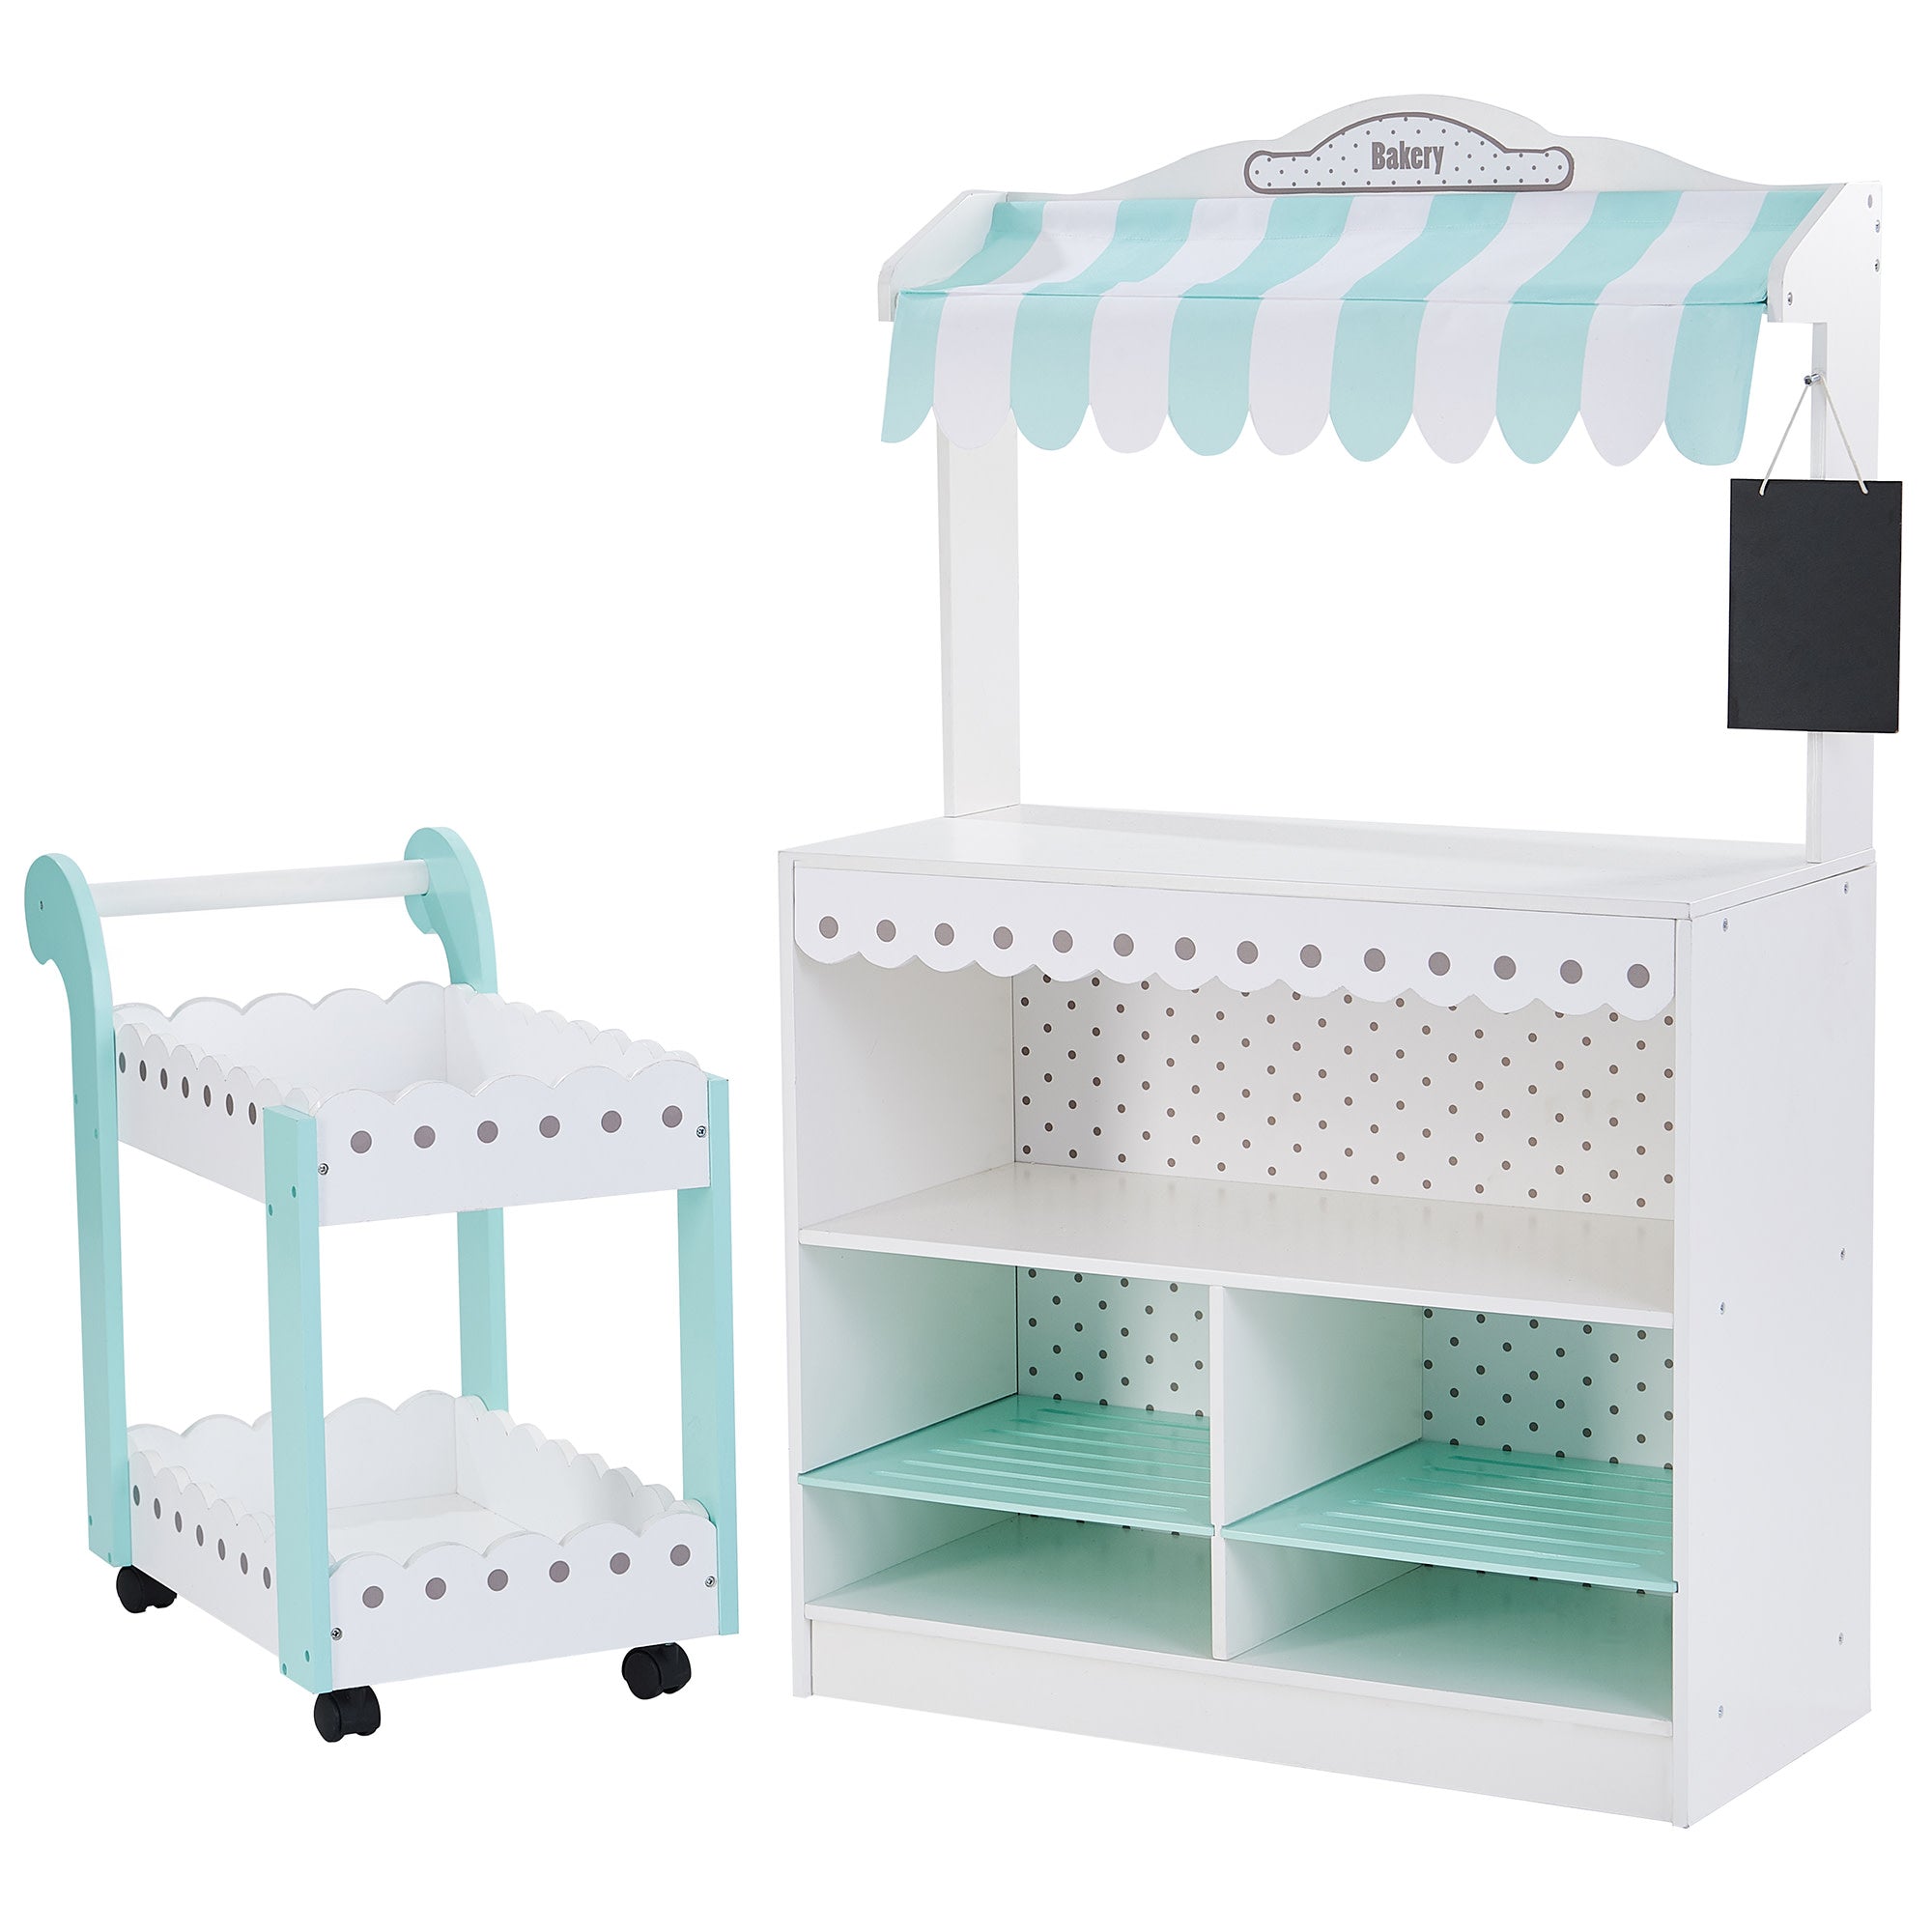 Teamson Kids My Dream Bakery Shop, Treat Stand and Dessert Cart, White